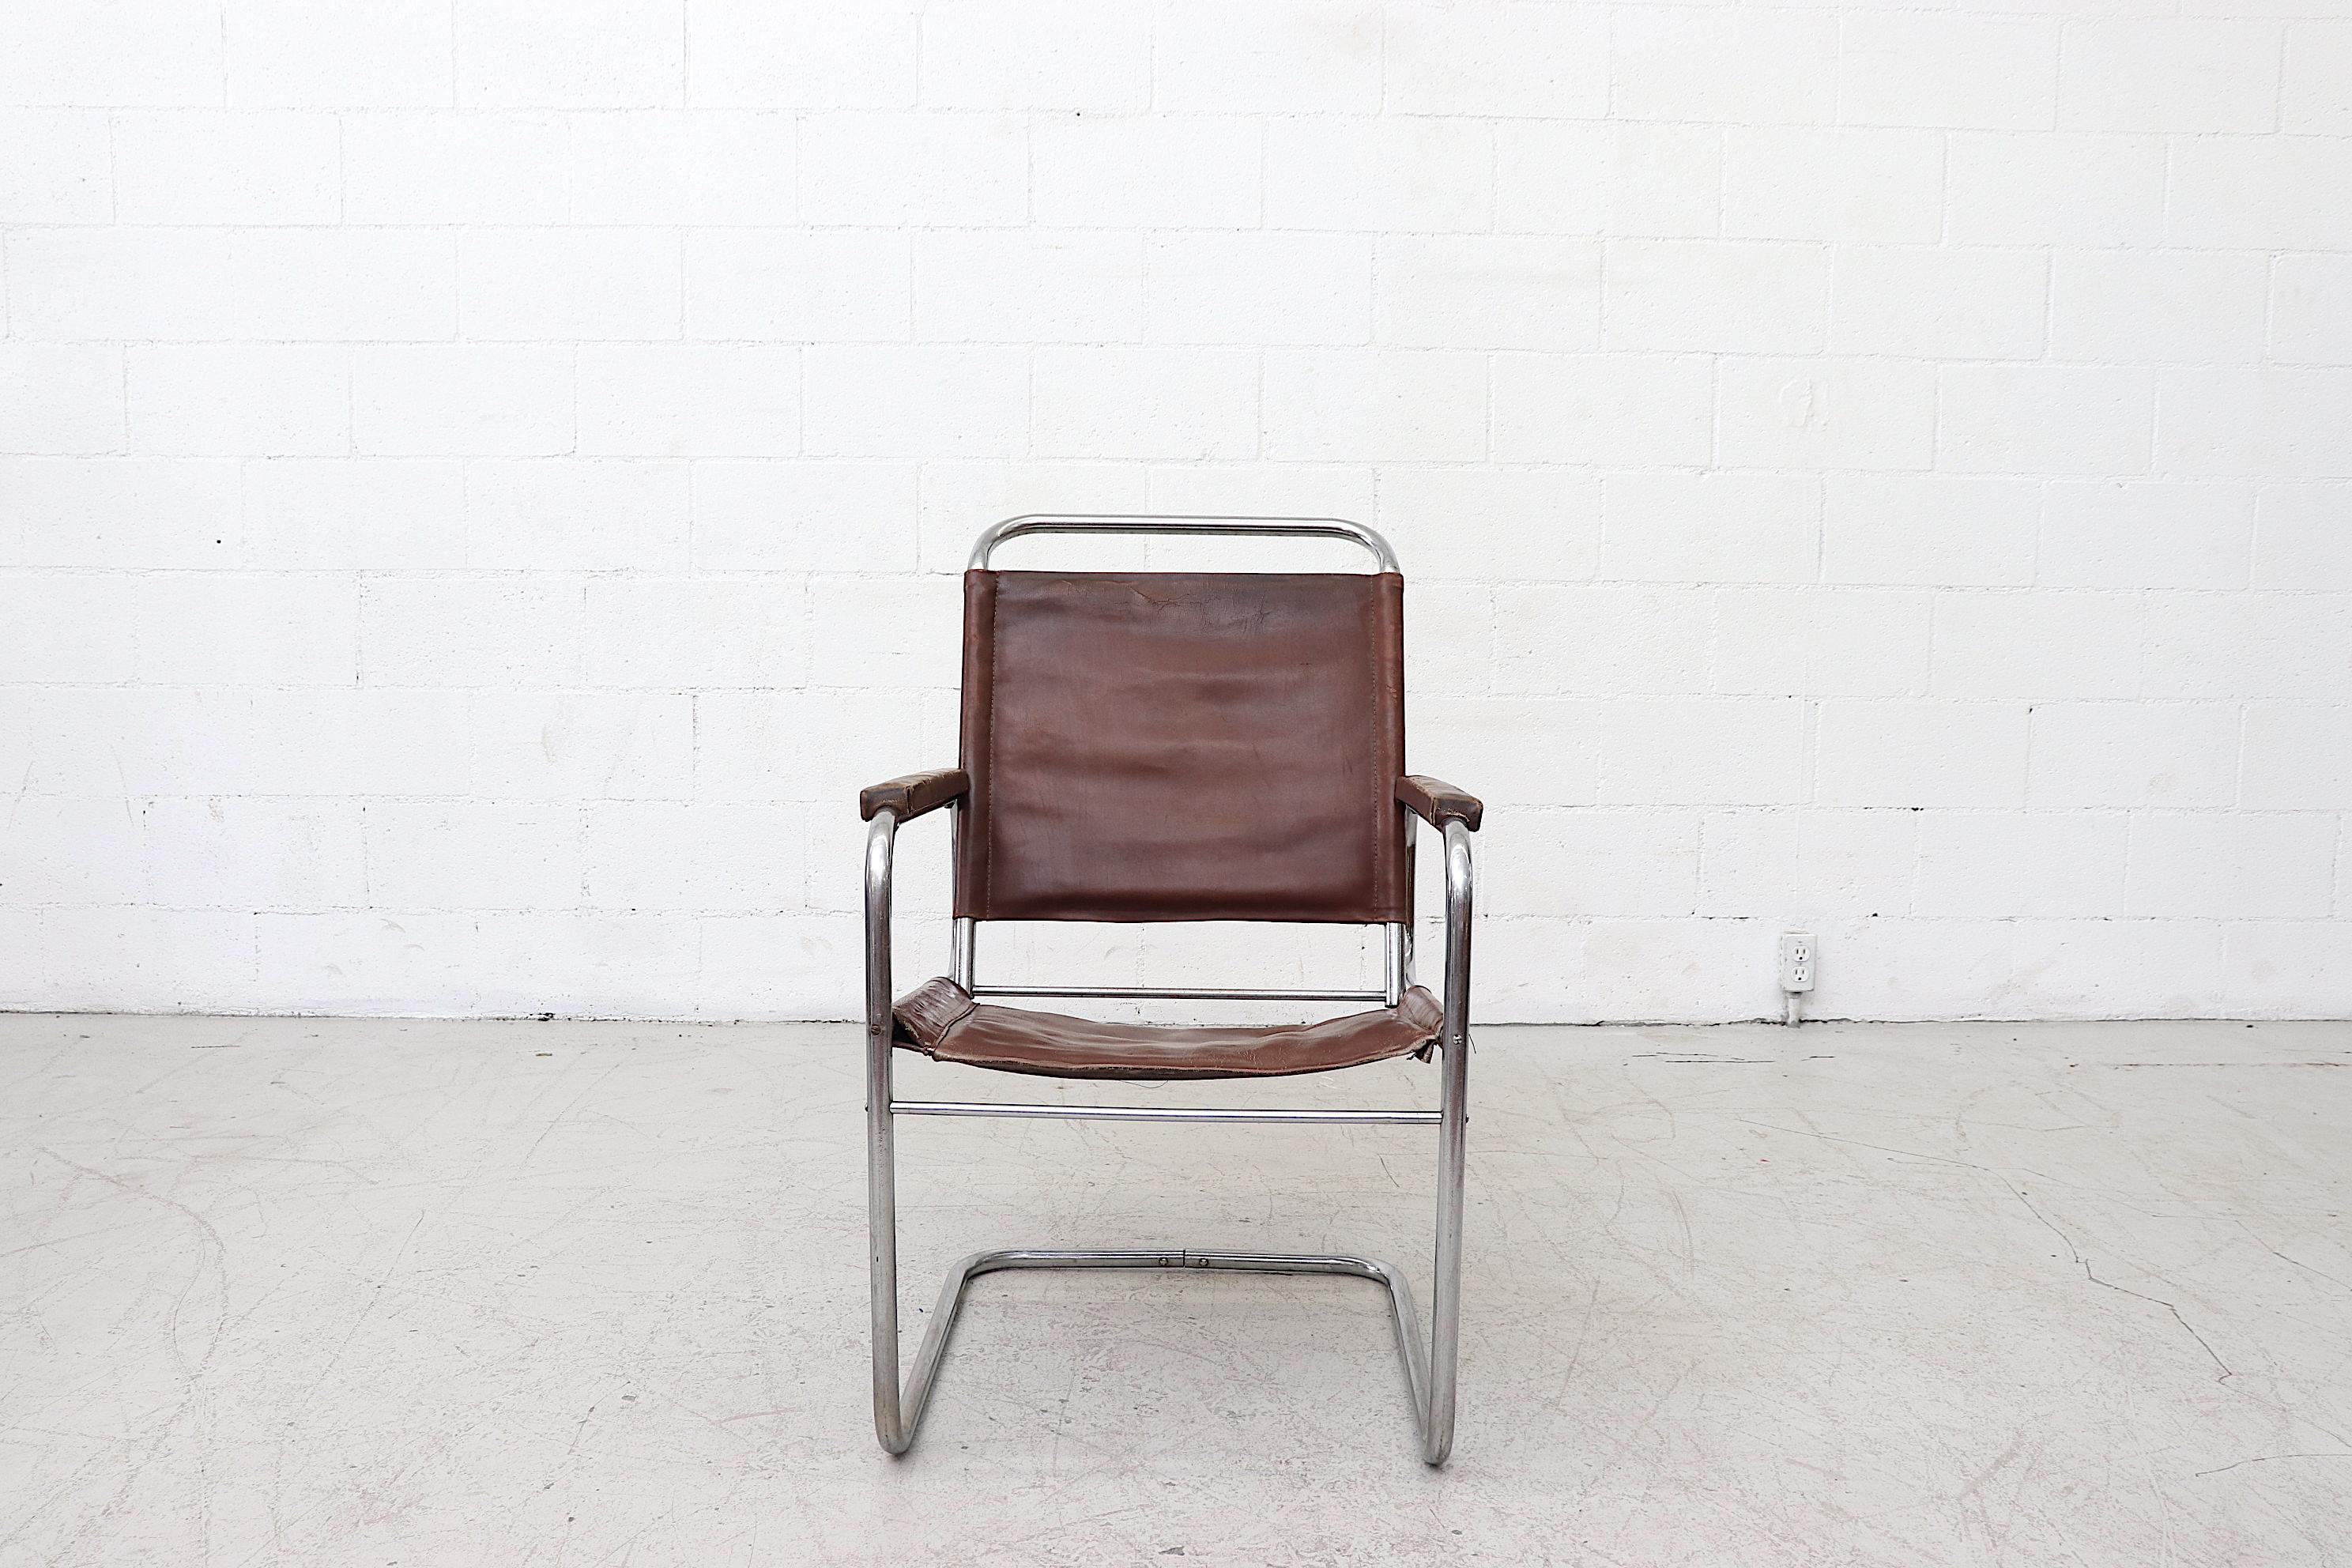 Cantilevered, quintessential Bauhaus leather armchair with tubular chrome frame. In very original condition with heavy patina on leather and some chrome loss. Wear is consistent with its age and use.